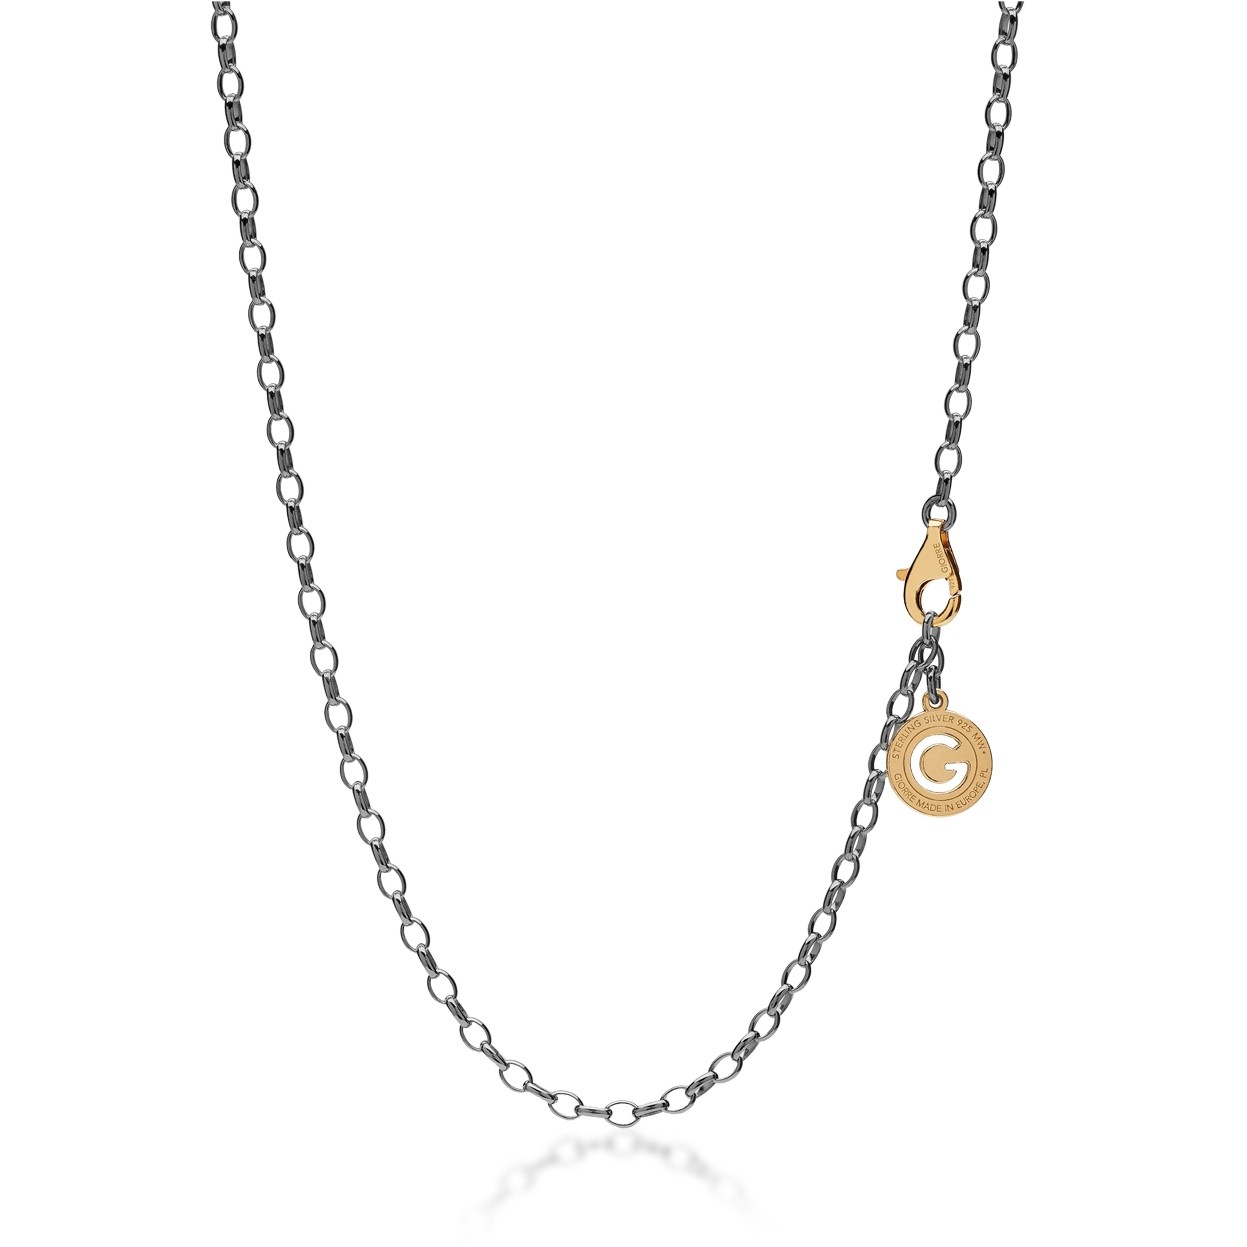 Sterling silver necklace 55-65 cm black rhodium, yellow gold clasp, link 4x3 mm